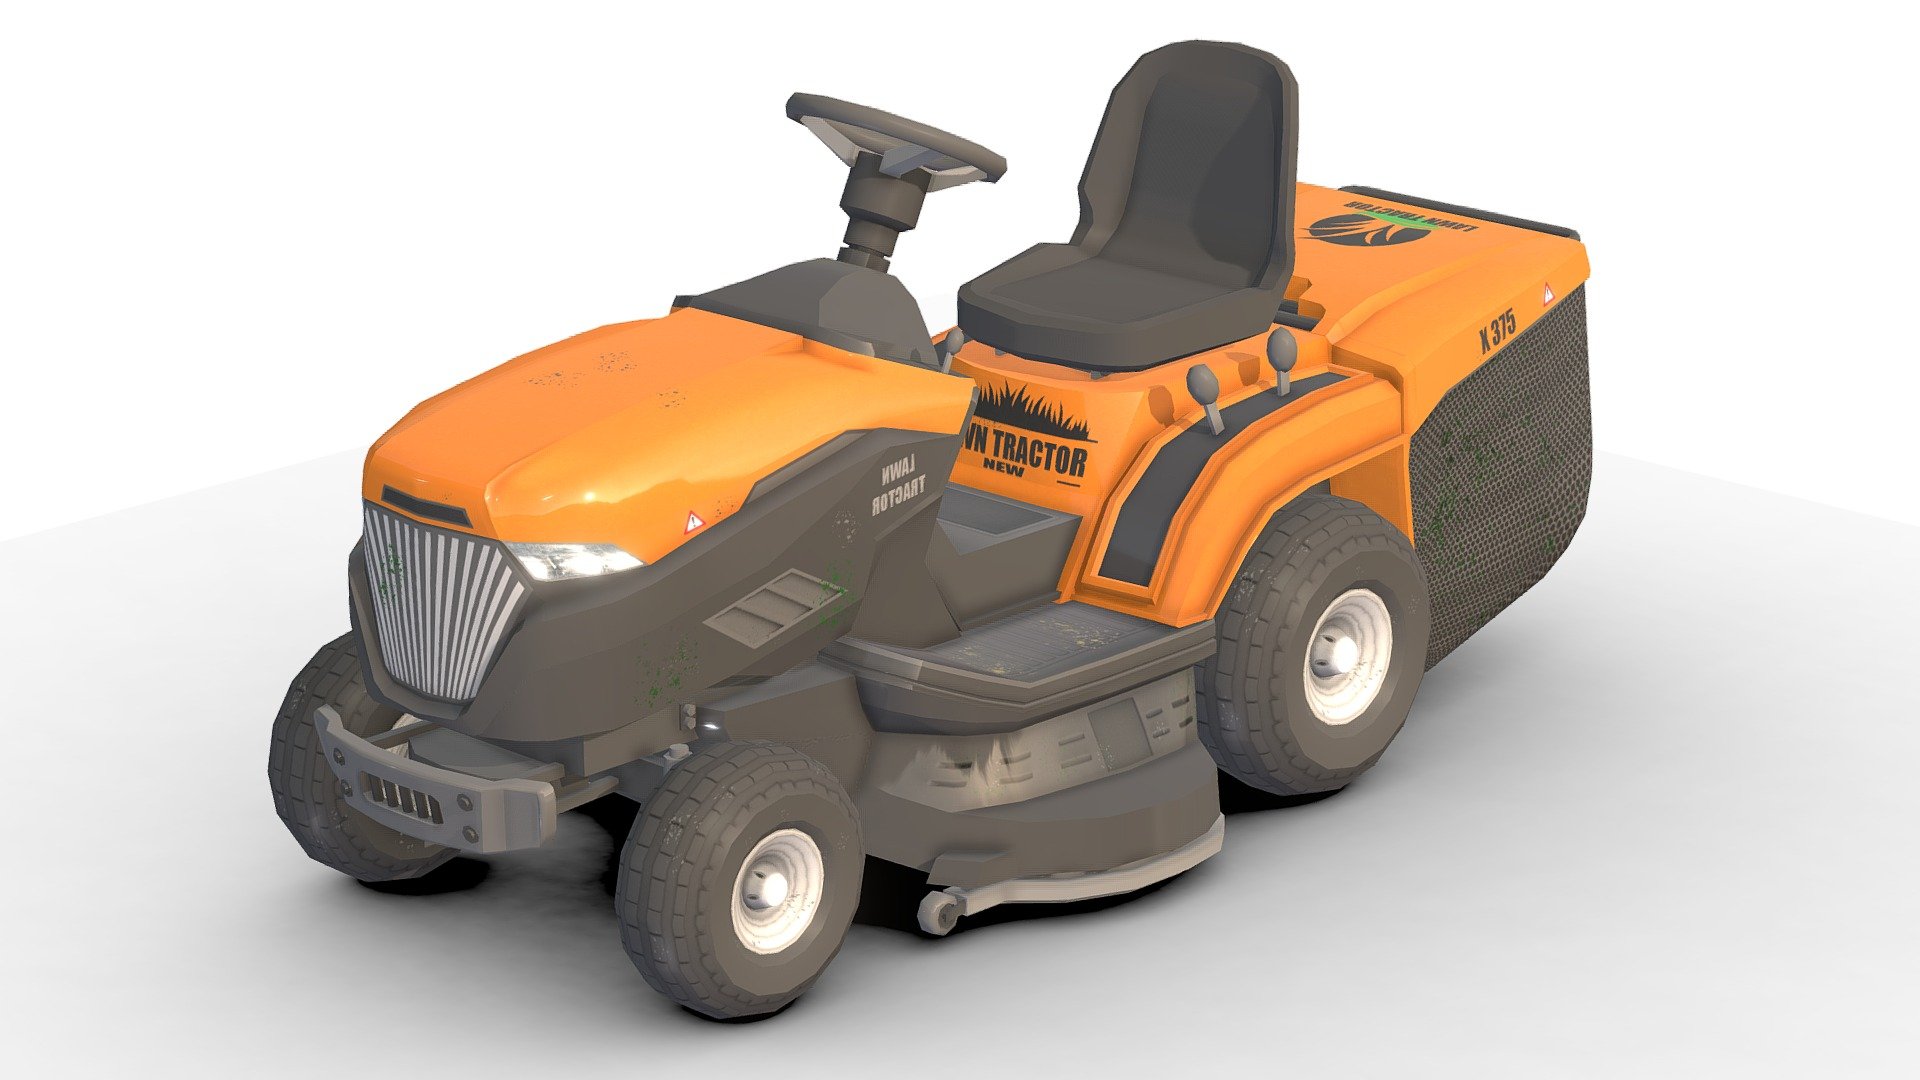 Lawn Tractor Low-Poly .

You can use these models in any game and project.

This model is made with order and precision.

Separated parts (bodys. wheels.Steer .Tractor gear).

Very Low- Poly.

Truck have separate parts.

Average poly count: 7,000 tris.

Texture size: 2048 / 1024 (PNG).

Number of textures: 2.

Number of materials: 3.

Format: Fbx / Obj / 3DMax .

Wait for my new models.. Your friend (Sidra) 3d model